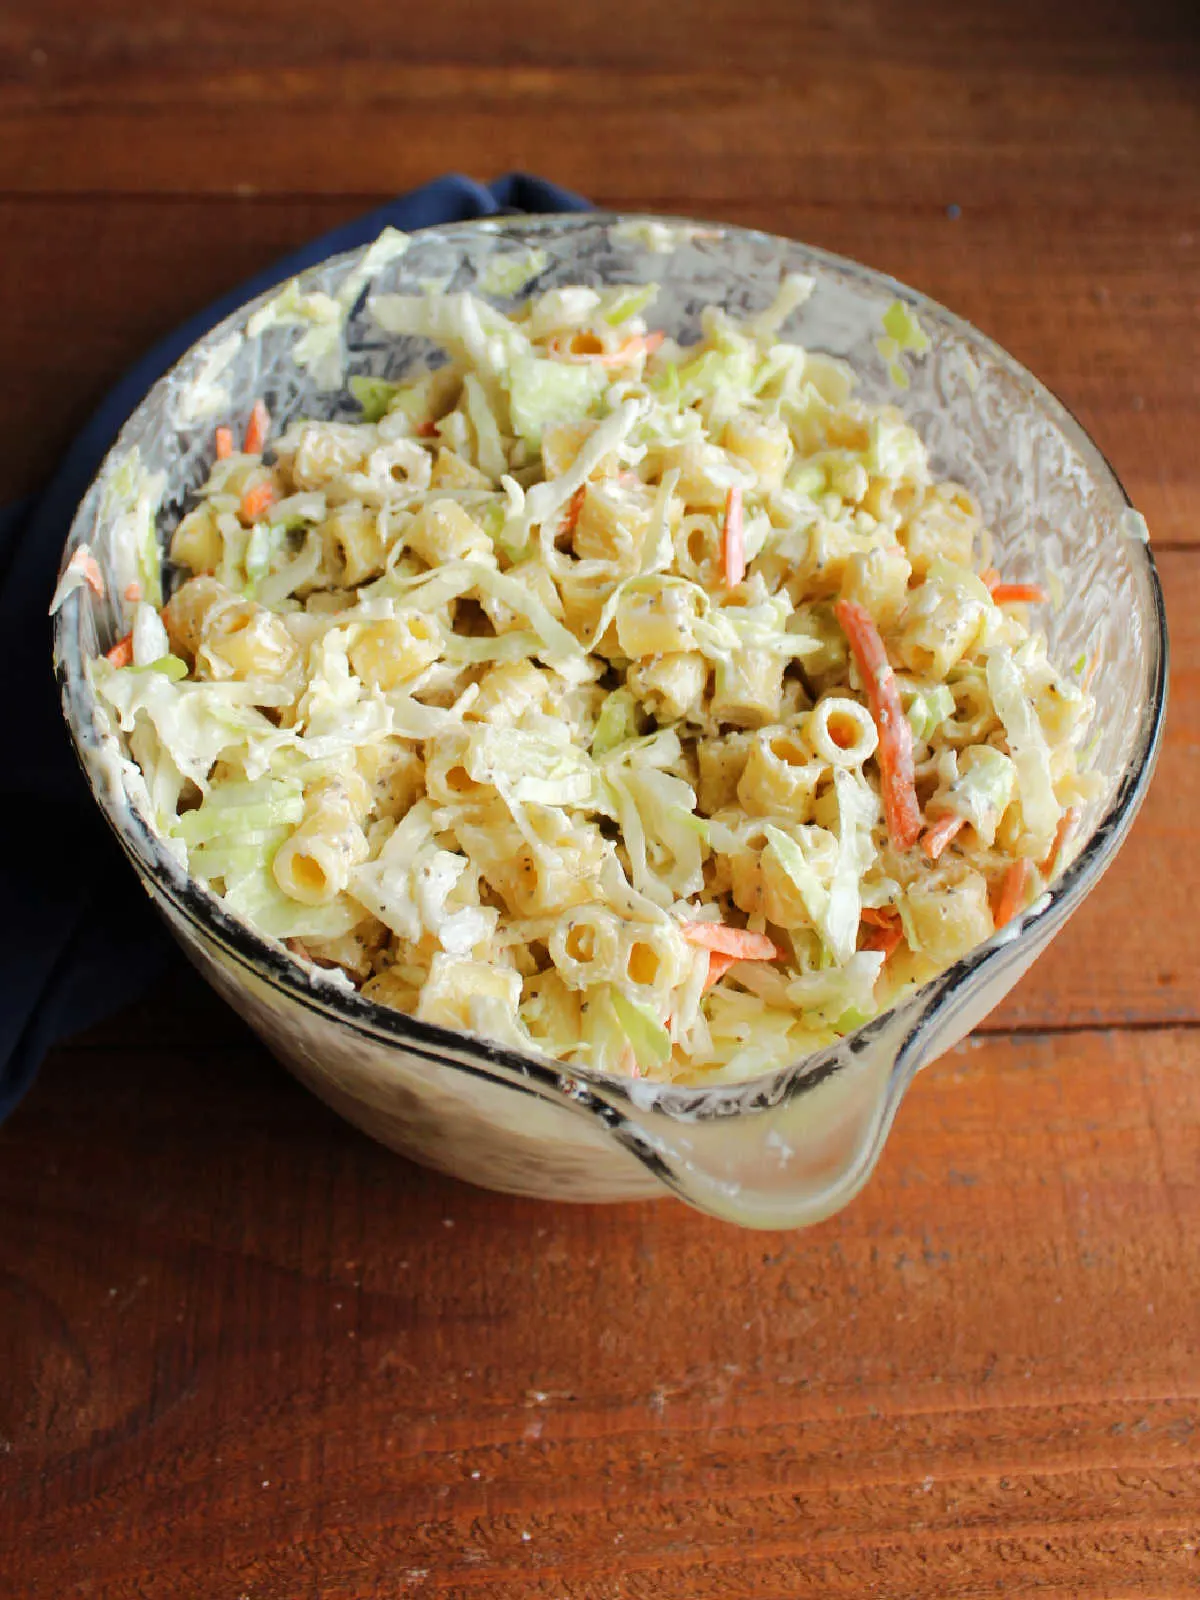 Bowl of coleslaw pasta salad after it has chilled for a couple of hours showing how the cabbage has softened and the volume has decreased a bit. 